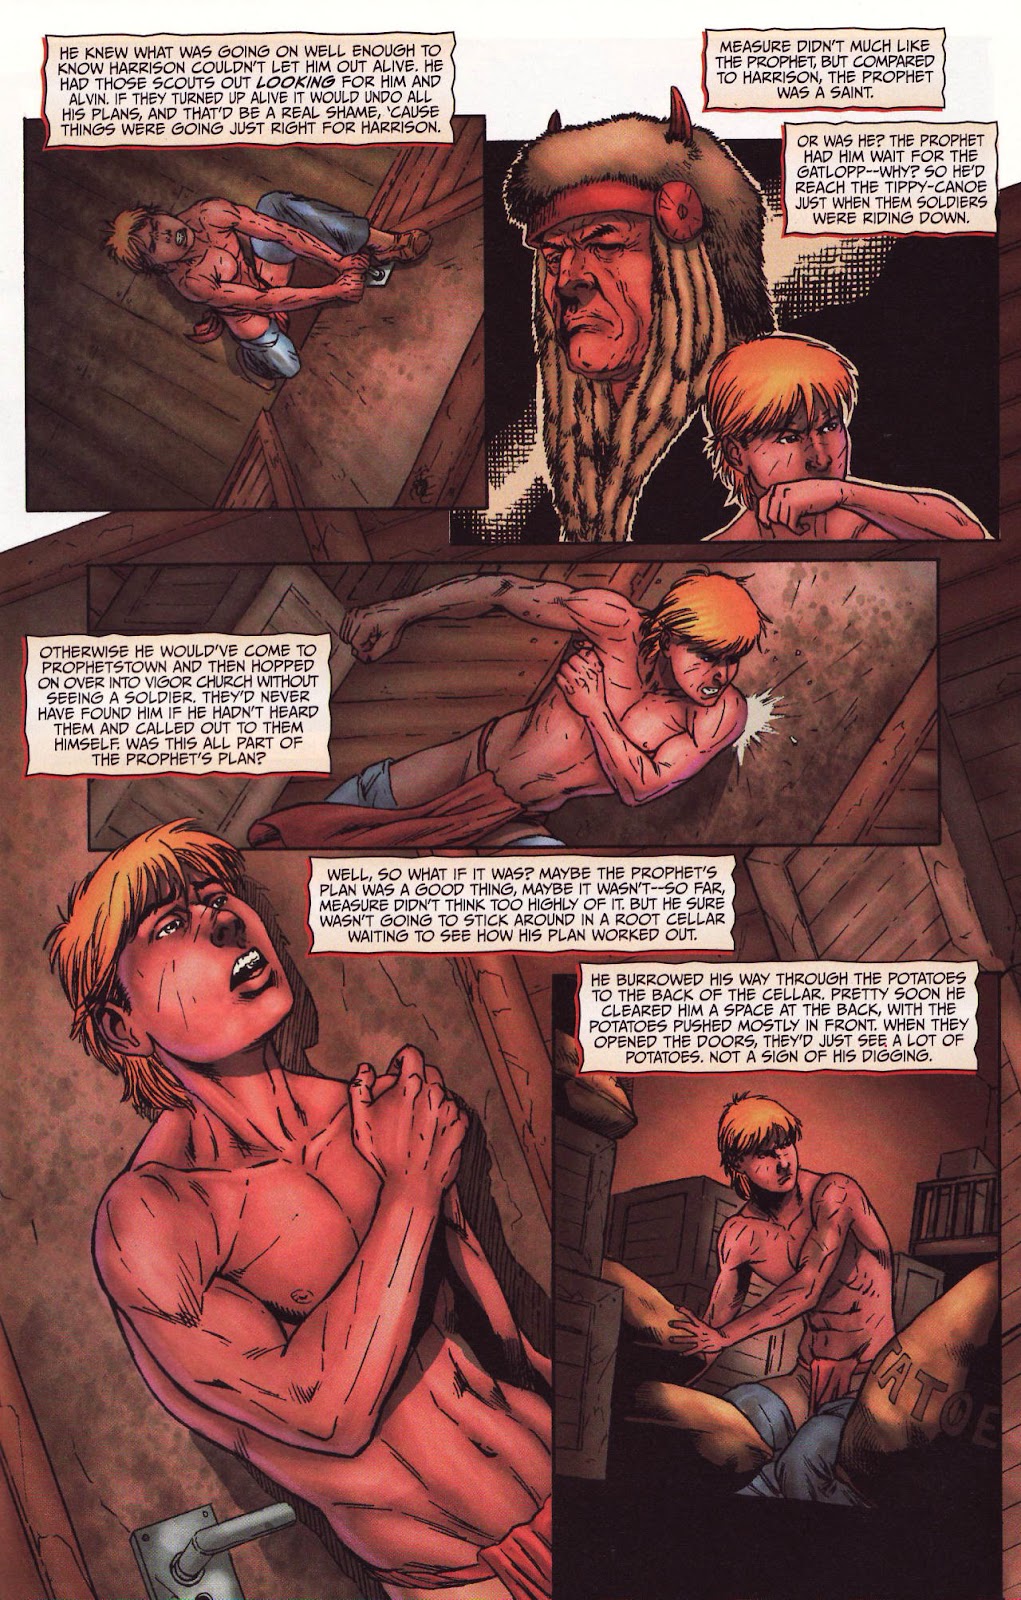 Red Prophet: The Tales of Alvin Maker issue 8 - Page 13